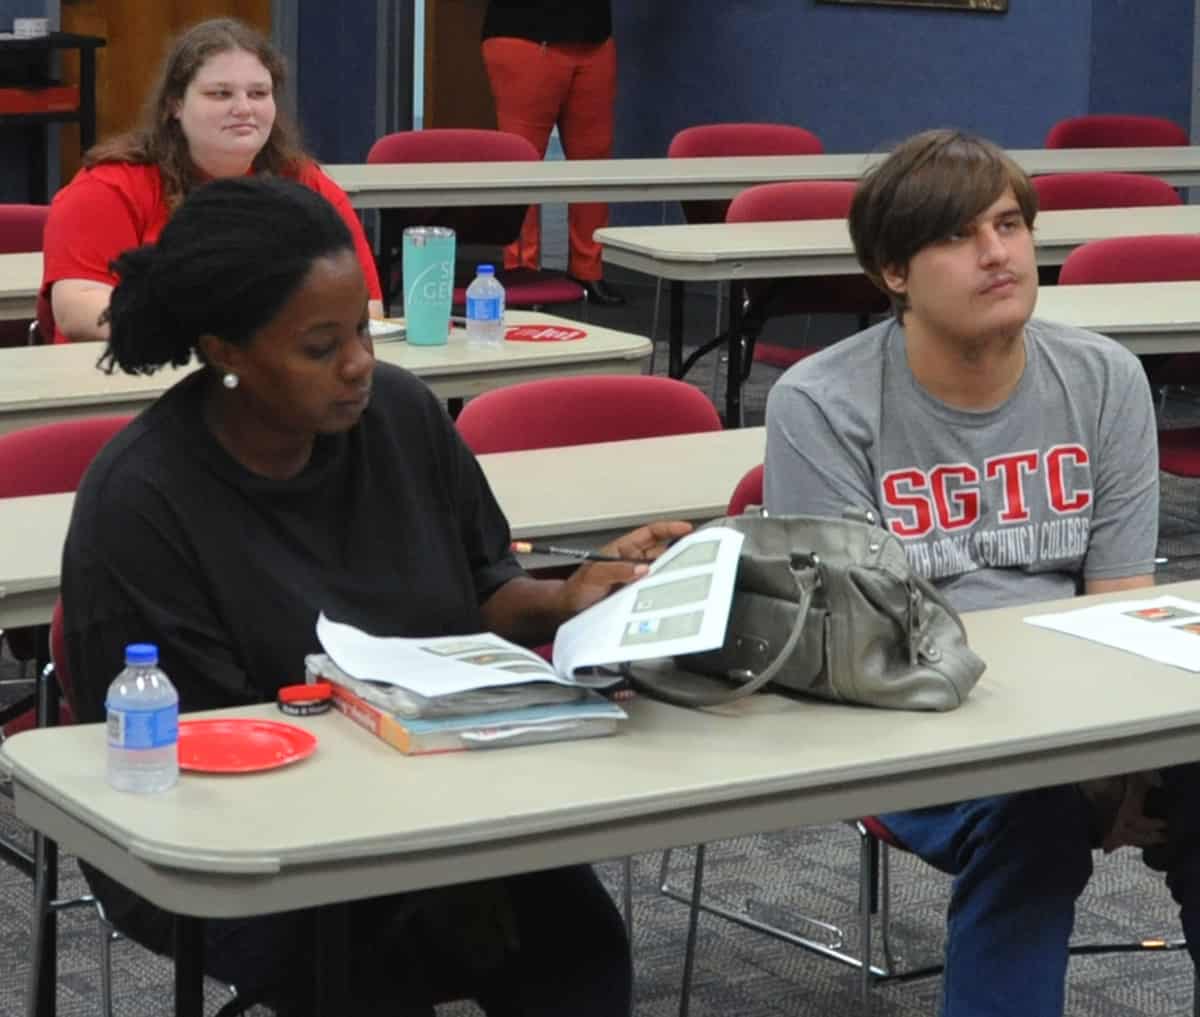 Students learn valuable reading and writing skills and strategies at a workshop on South Georgia Technical College’s Crisp County Center campus.